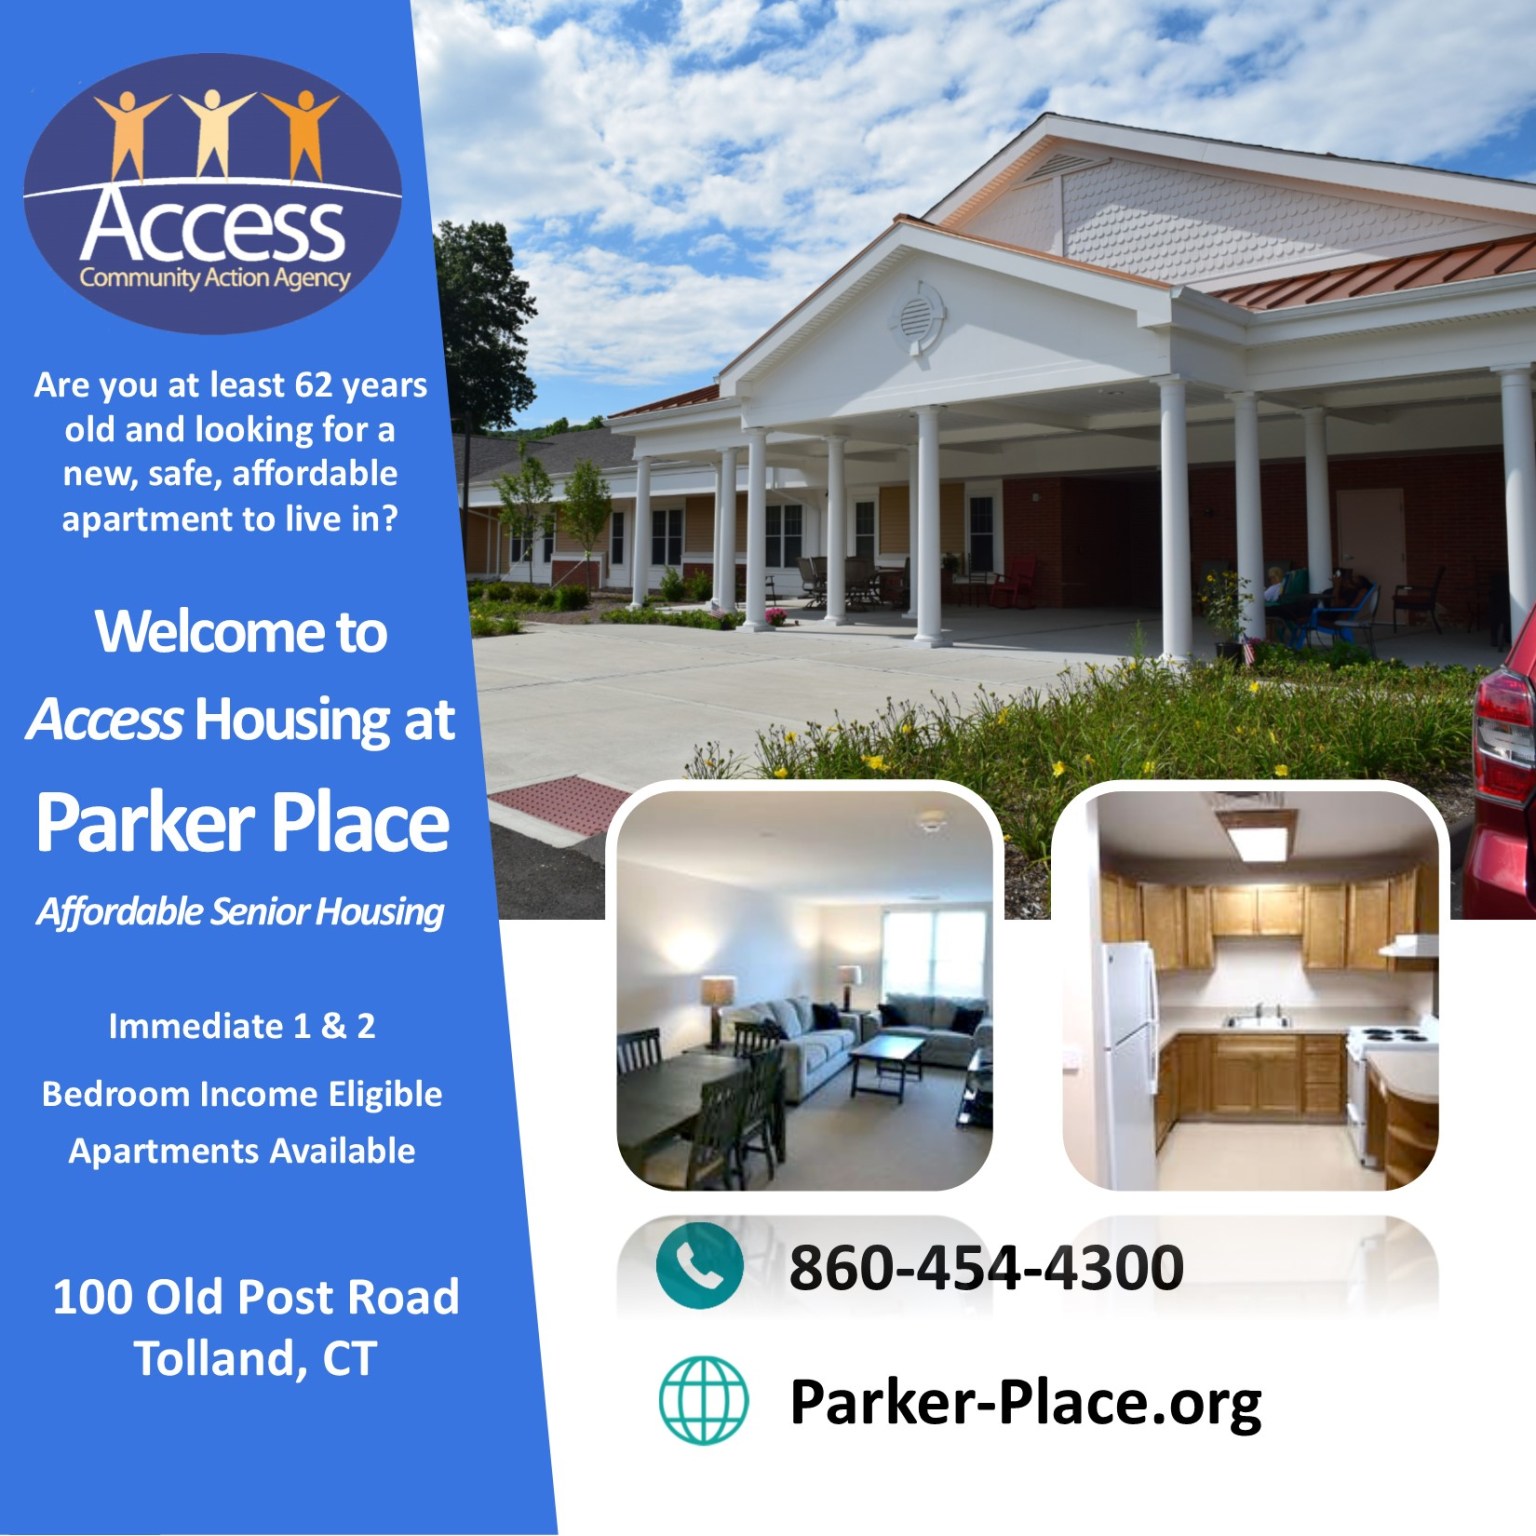 Welcome to Access Housing At Parker Place